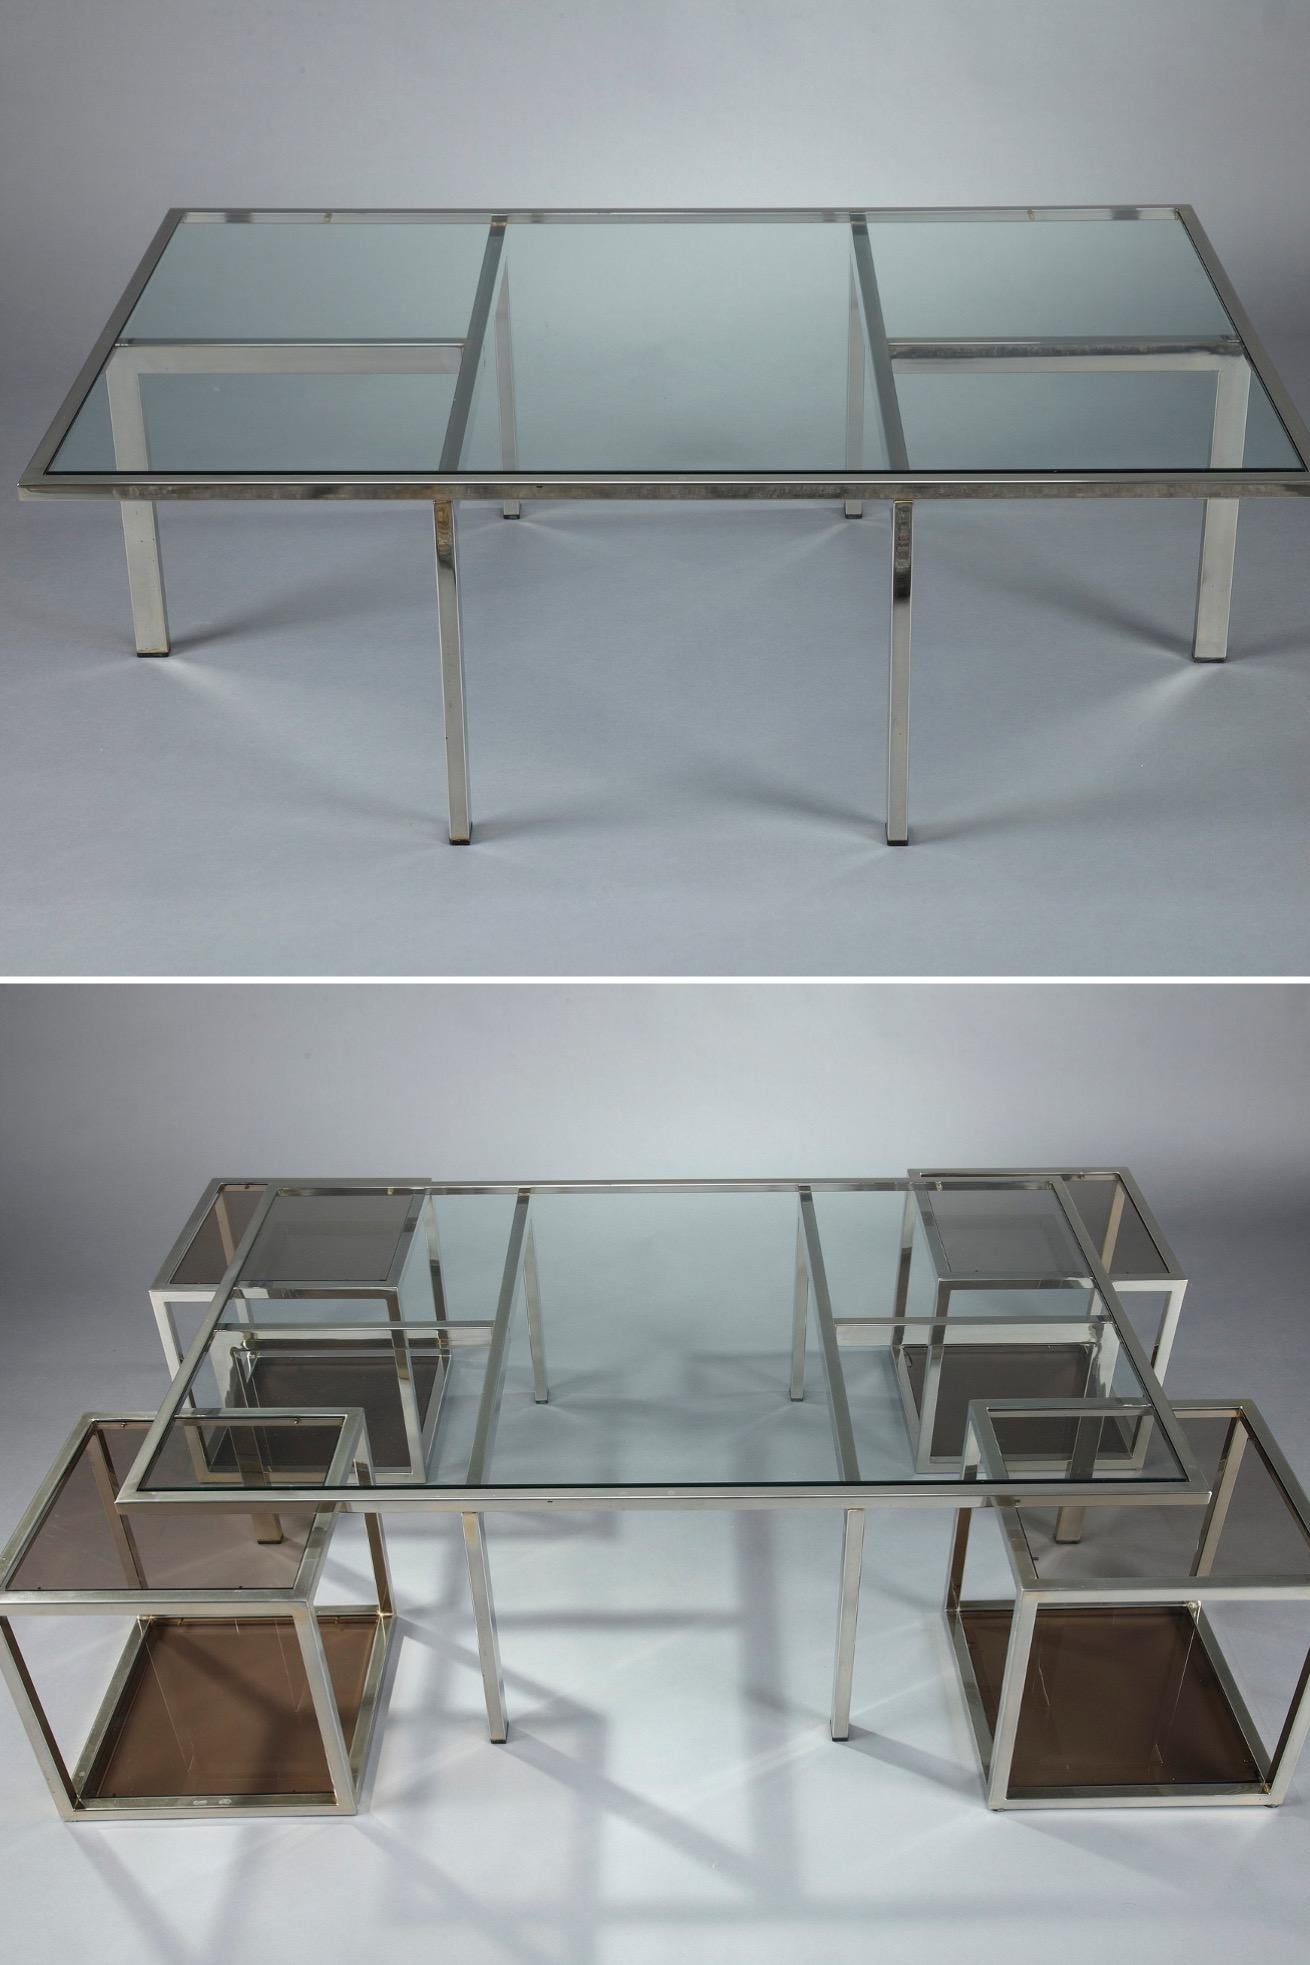 Coffee table in chromed metal and glass dating from the 1970s. The main glass and chromed metal table is rectangular and holds 4 other square side tables that slide into compartments in the four corners of the coffee table. The glass of the 4 side